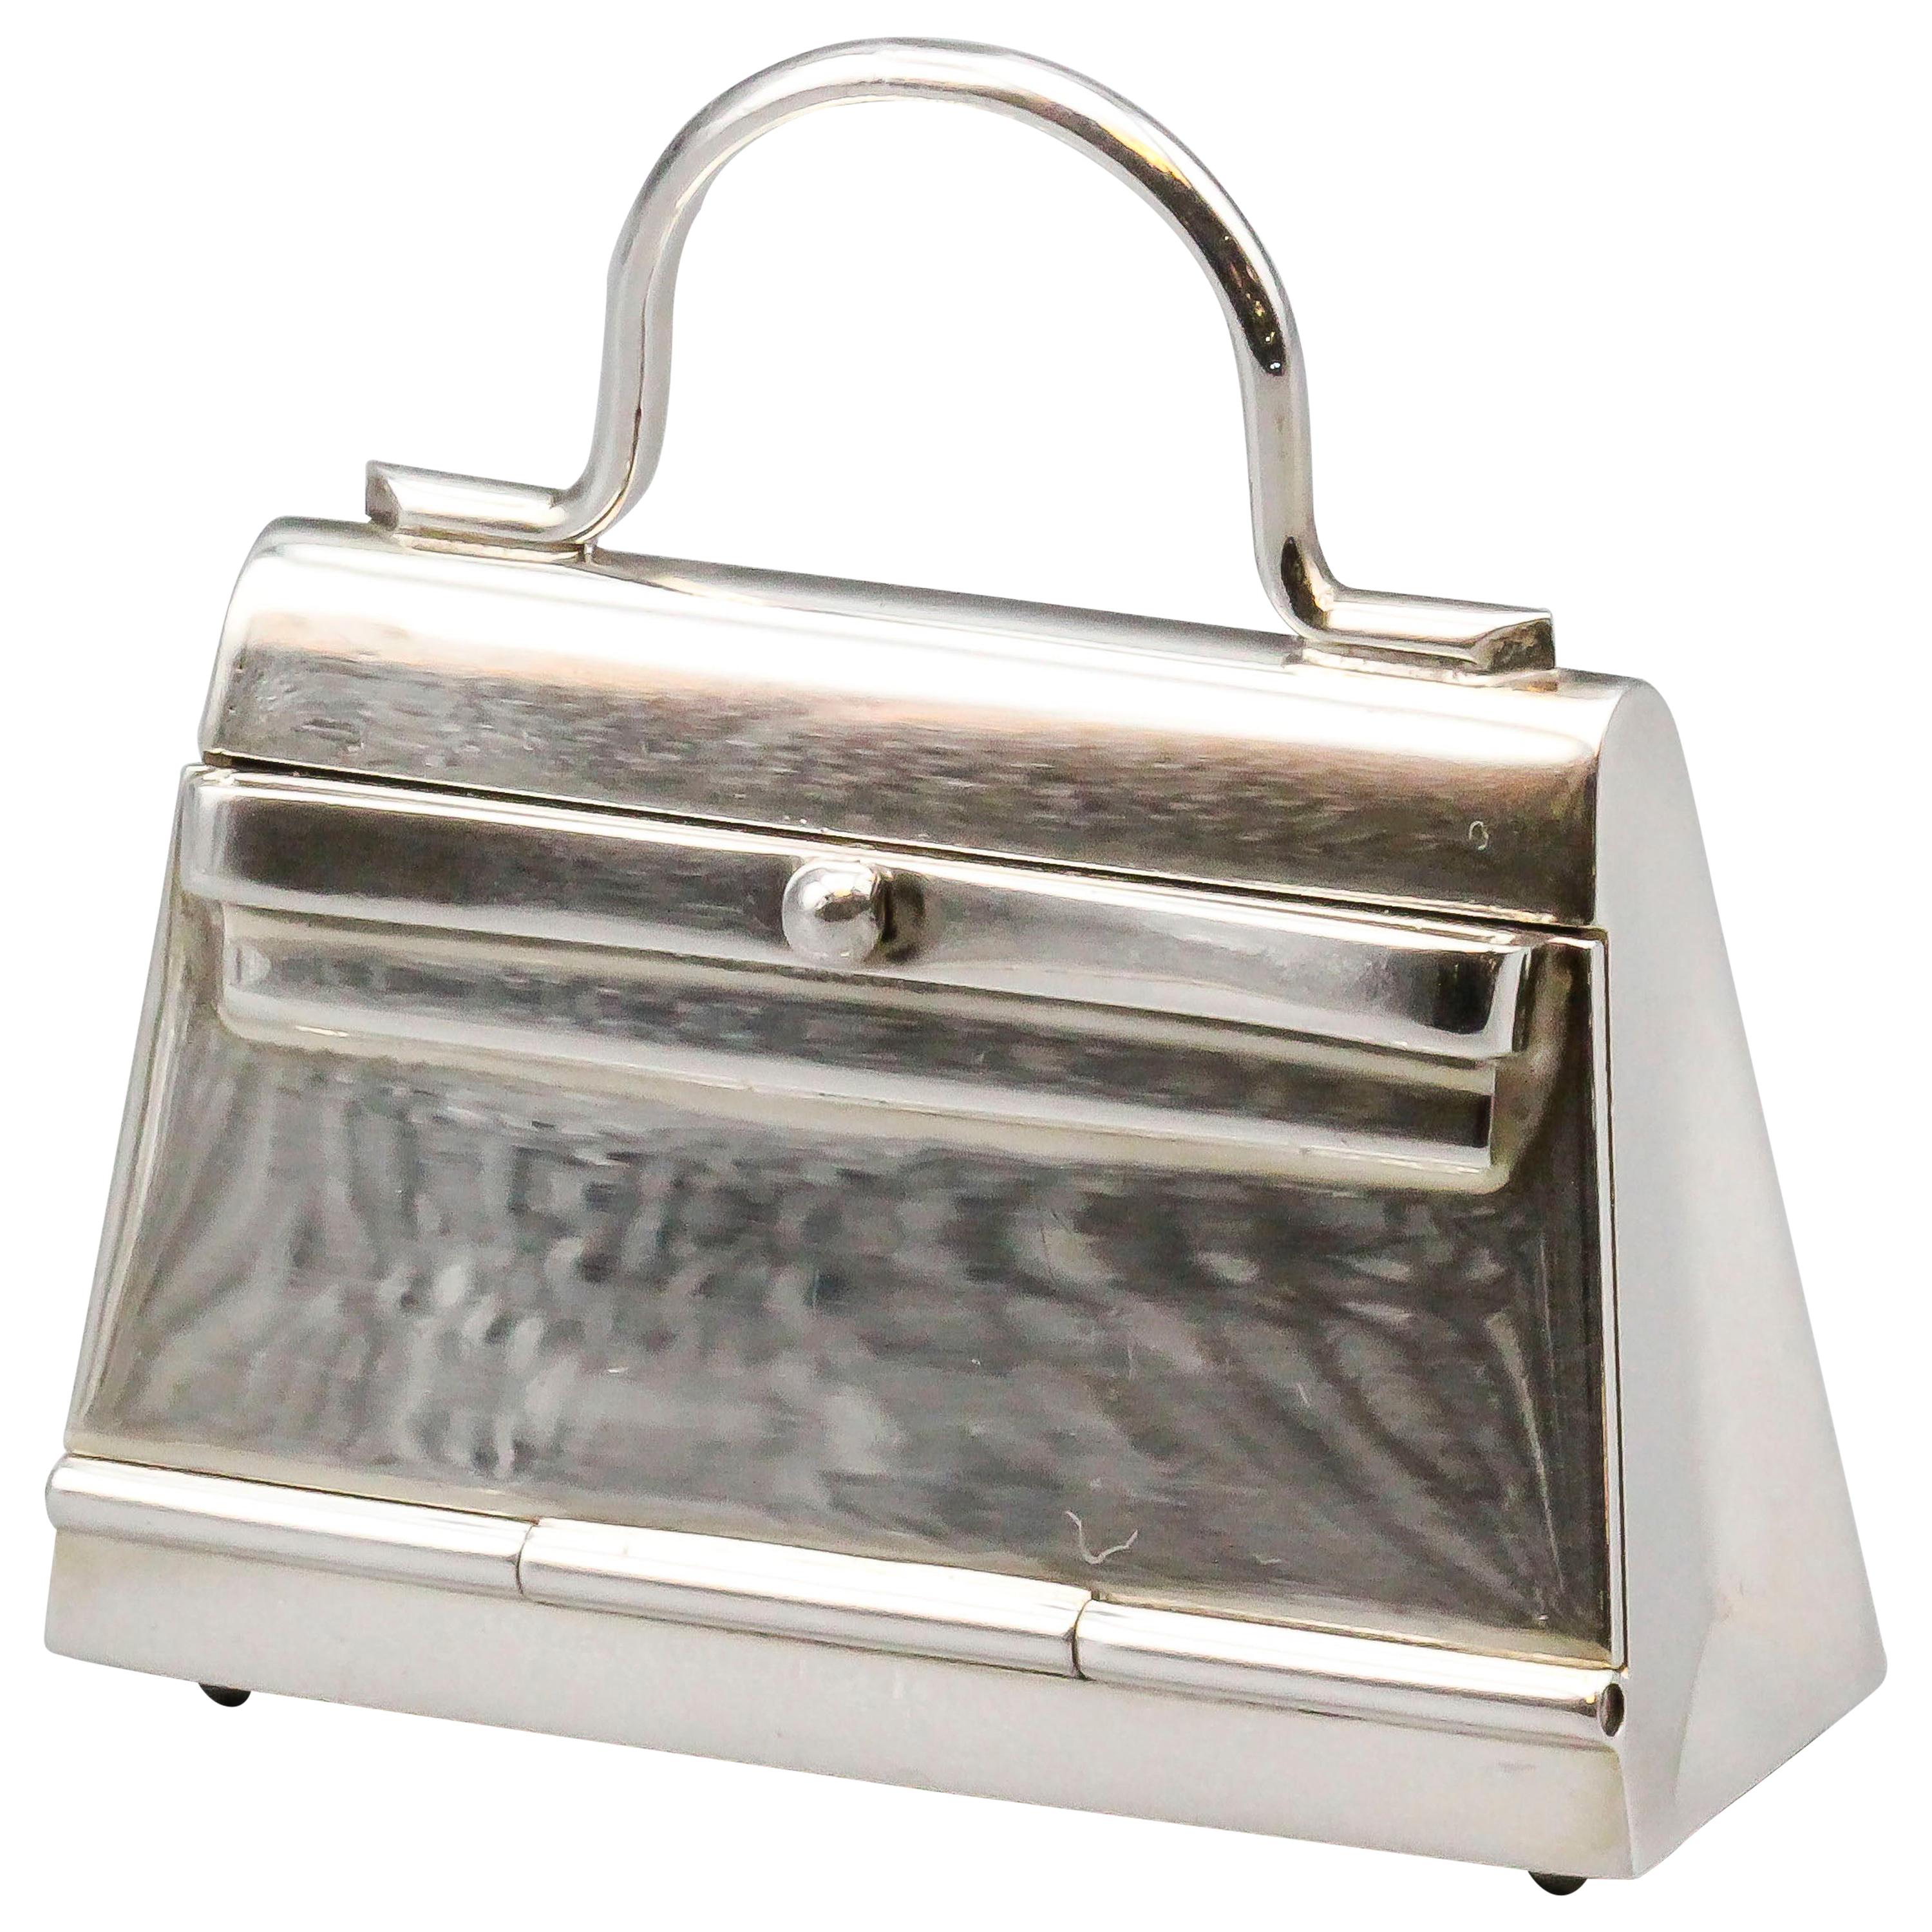 Fine sterling silver pill box in the likeness of an Hermes Kelly bag, by Hermes circa 1980s.  The box can be used in a multitude of ways: as a standard pillbox, a pendant, or as a charm.  Approx. 1.75 inches wide and approx. 40 grams in